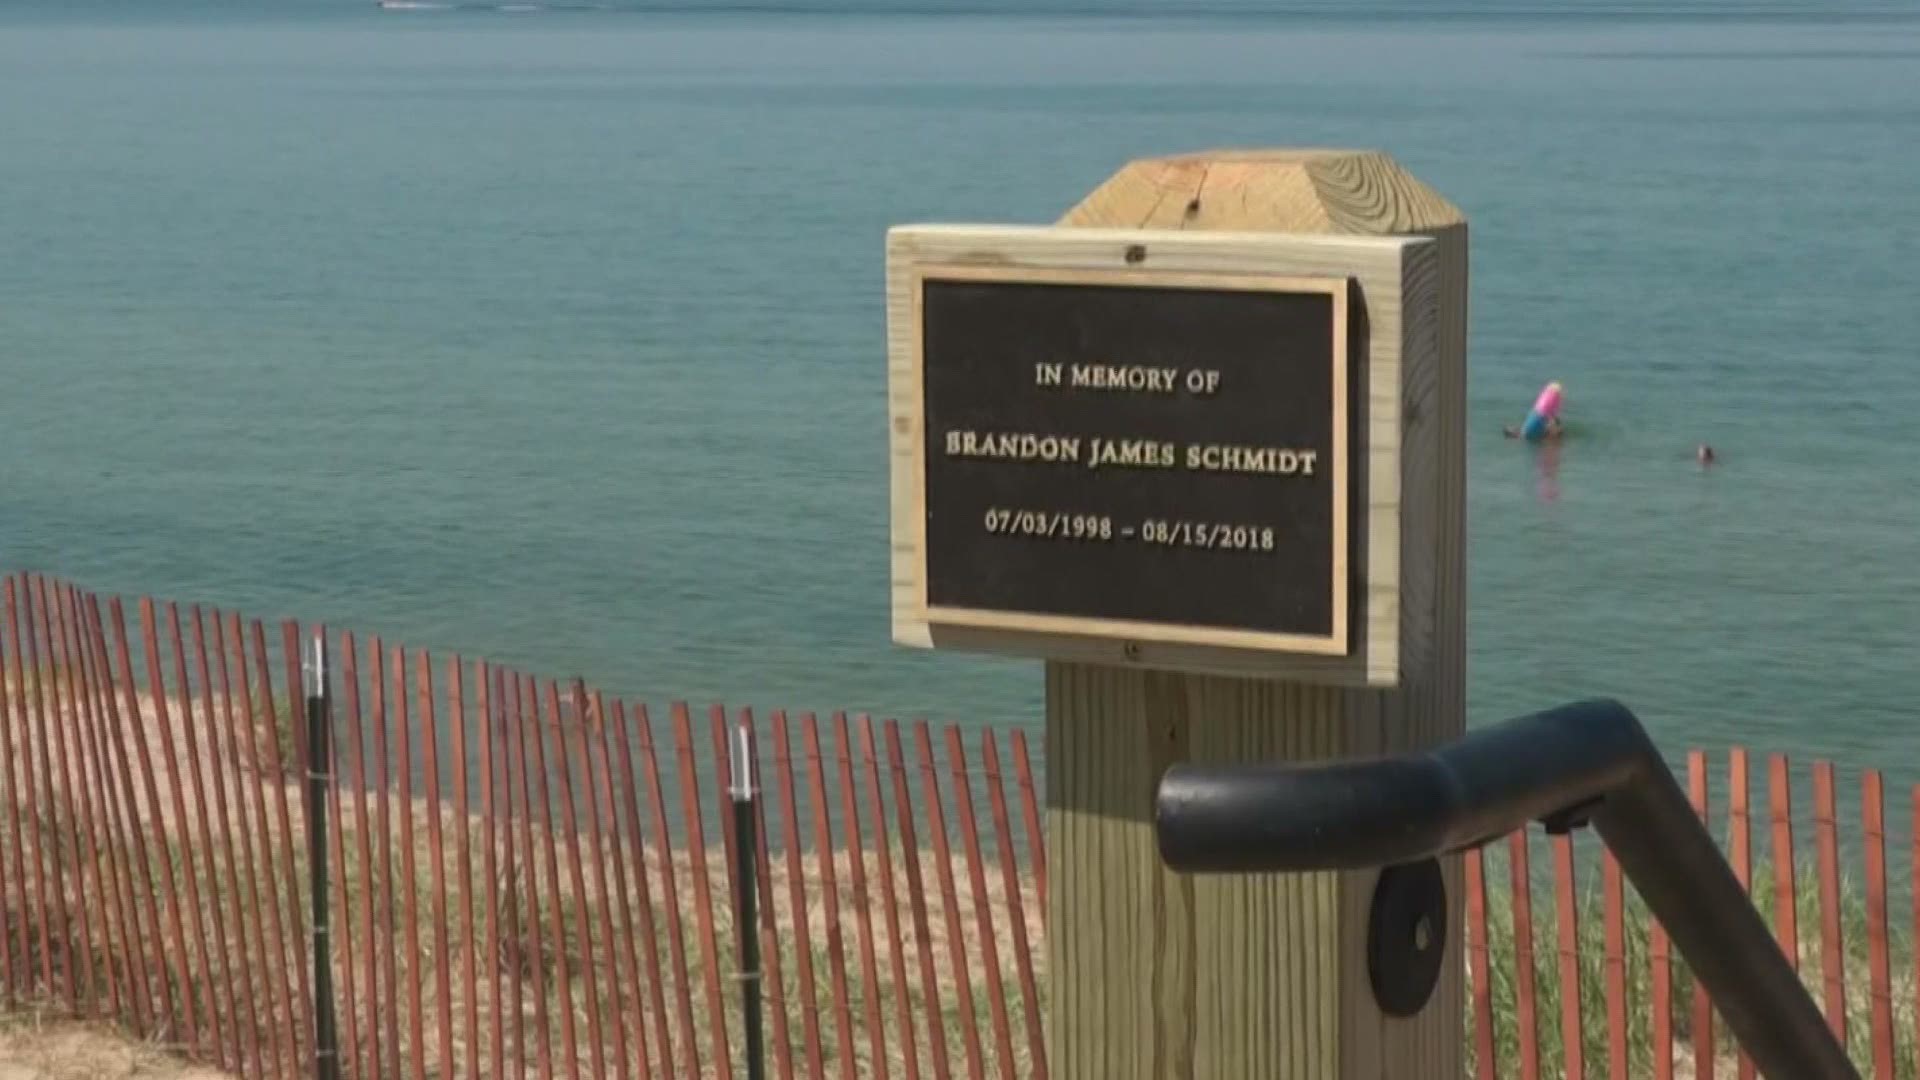 Since 2002, Ottawa Co. has reported more than 130 current-related incidents, making it statistically the least safe location to swim along Lake Michigan's shorelines